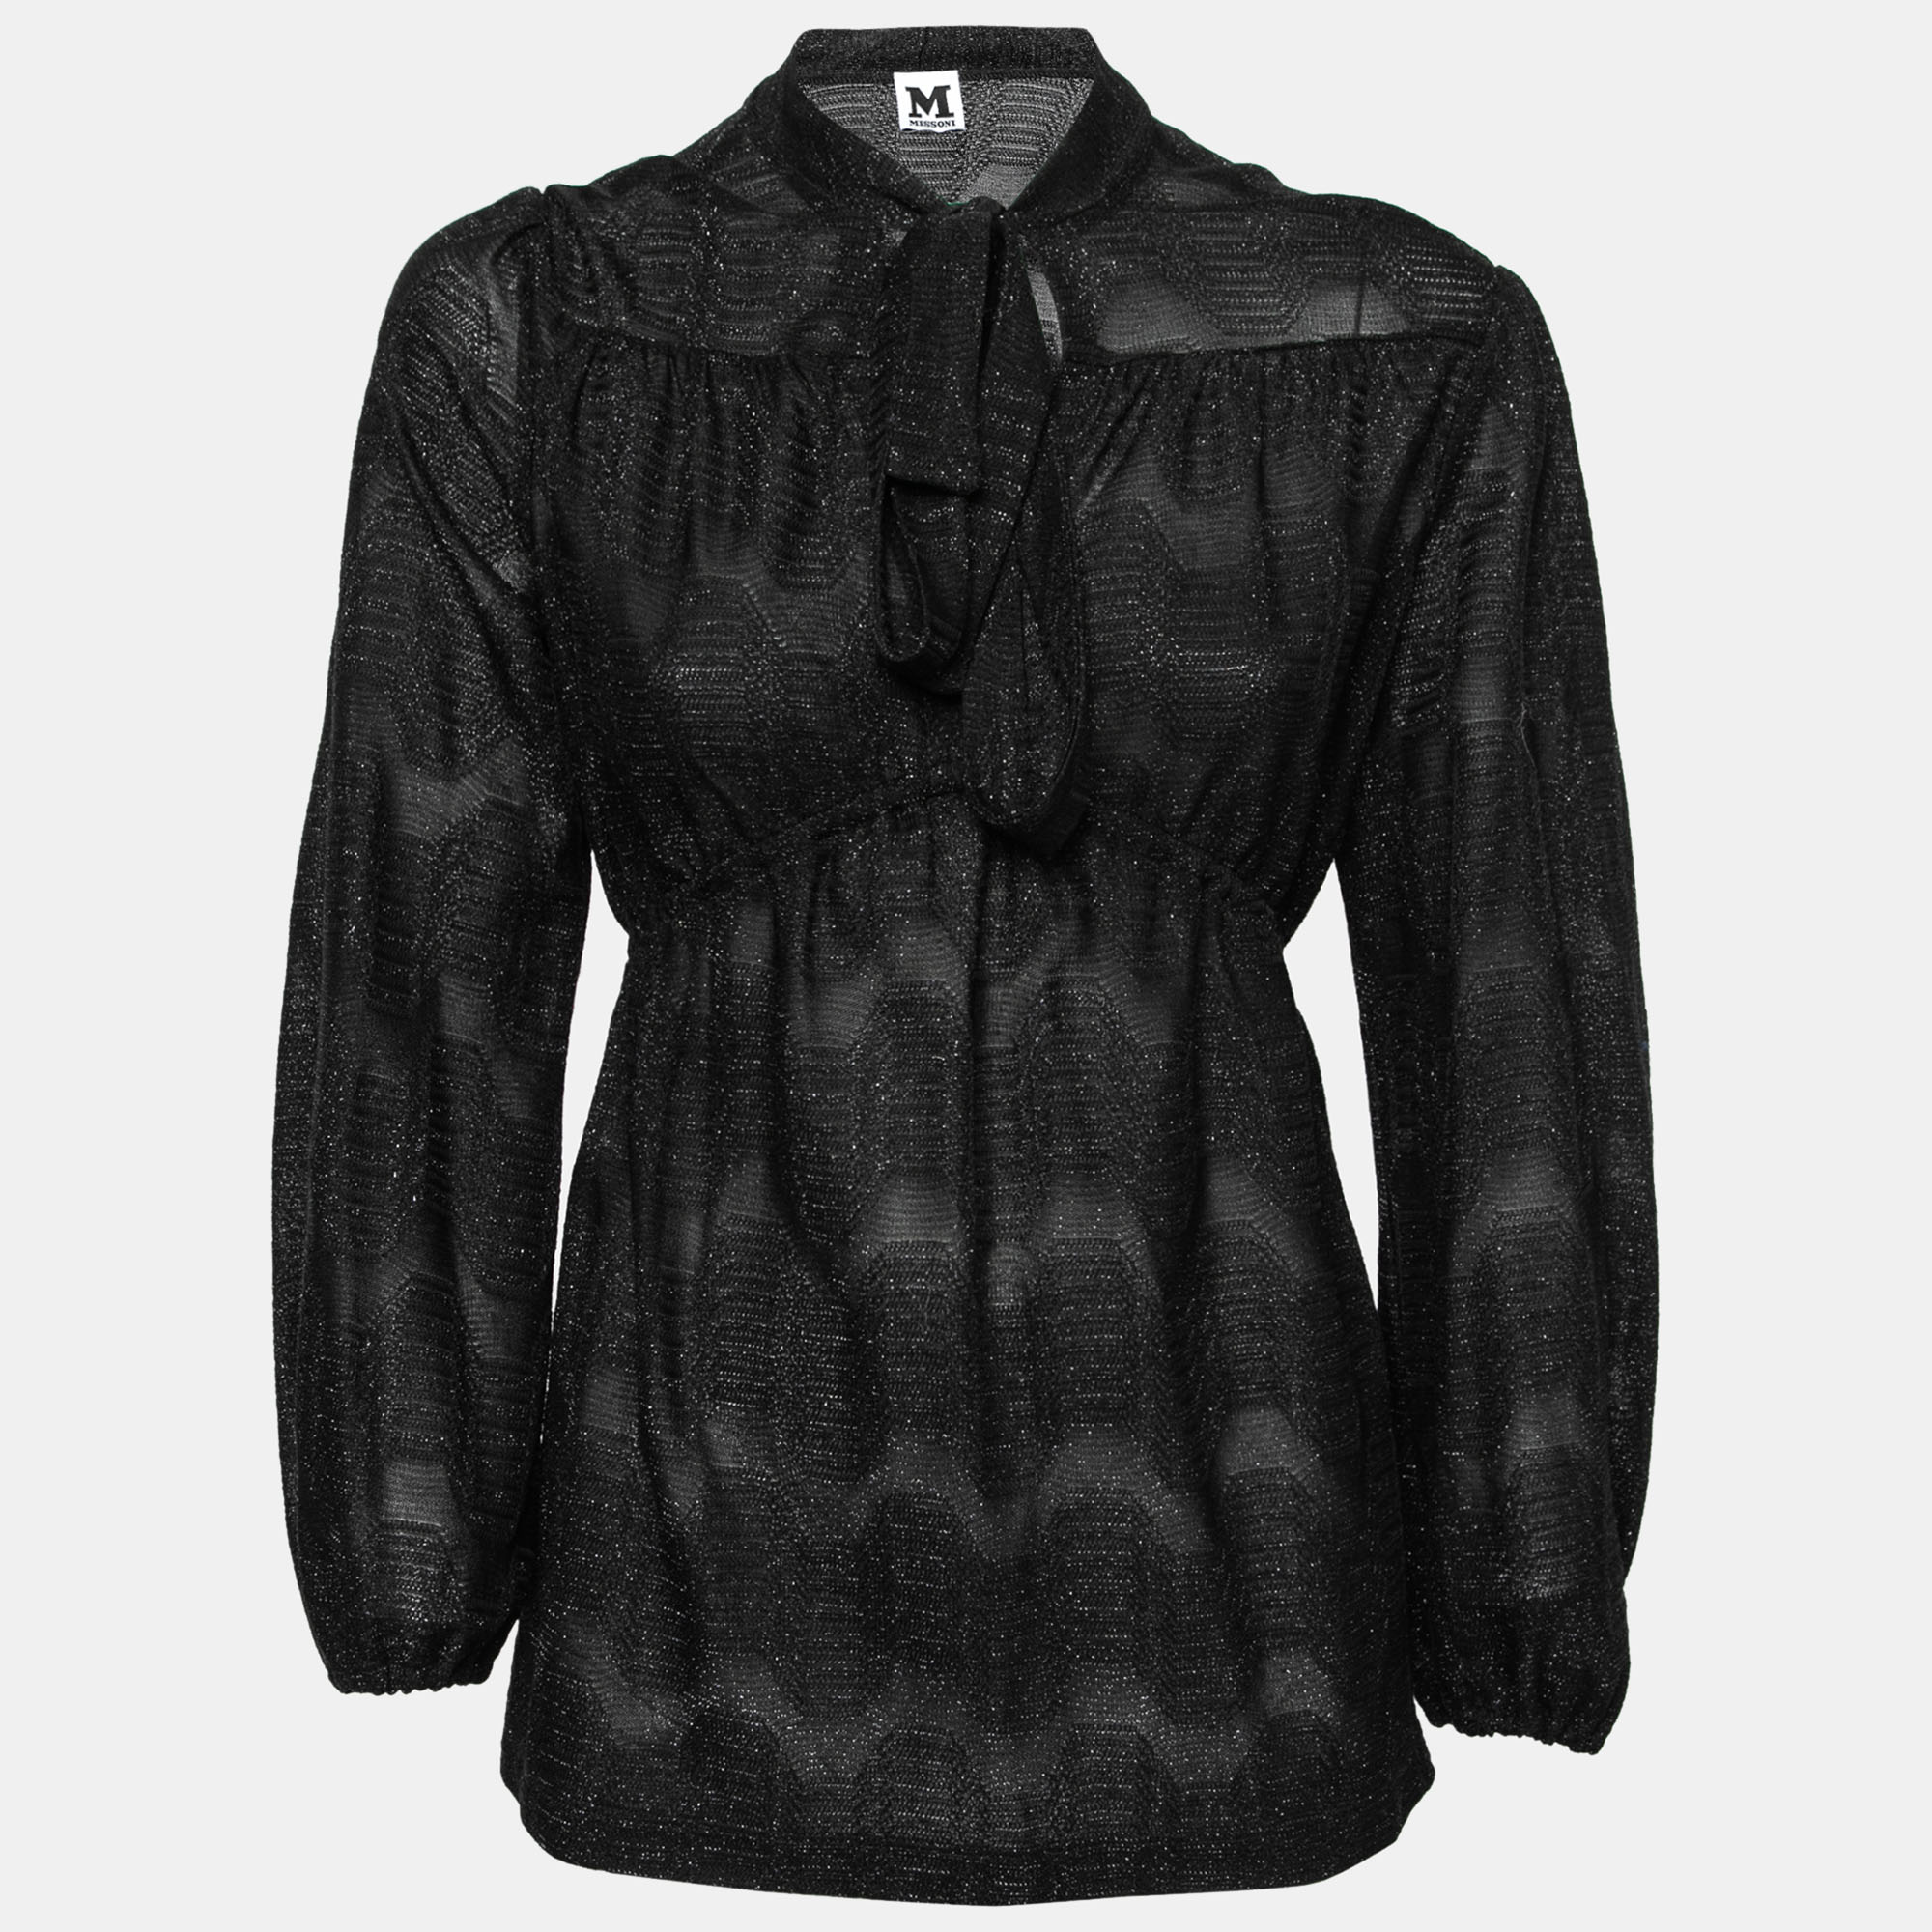 This top from M Missoni is all about sporting a classy and elegant style. It is tailored from black patterned lurex knit fabric and comes with a neck tie detail and long sleeves. You can wear it with light trousers and tall heels for an evening occasion. This classy top is all set to become a part of your wardrobe.